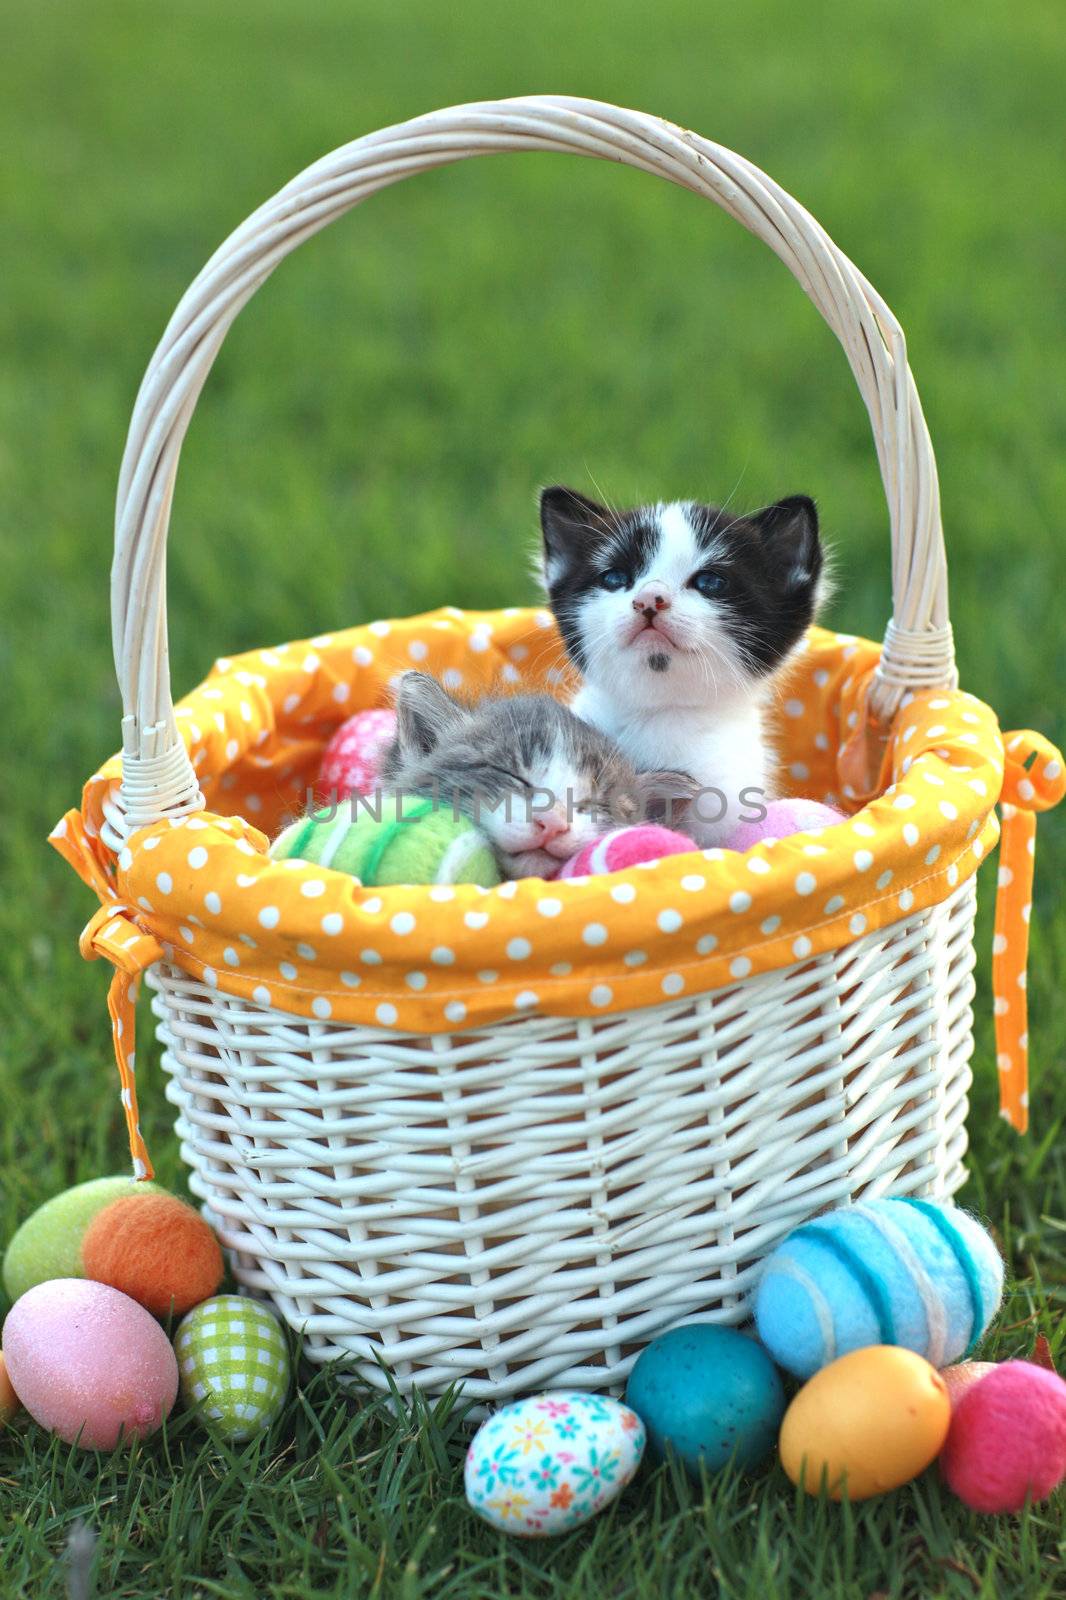 Adorable Kittens in a Holiday Easter Basket by tobkatrina